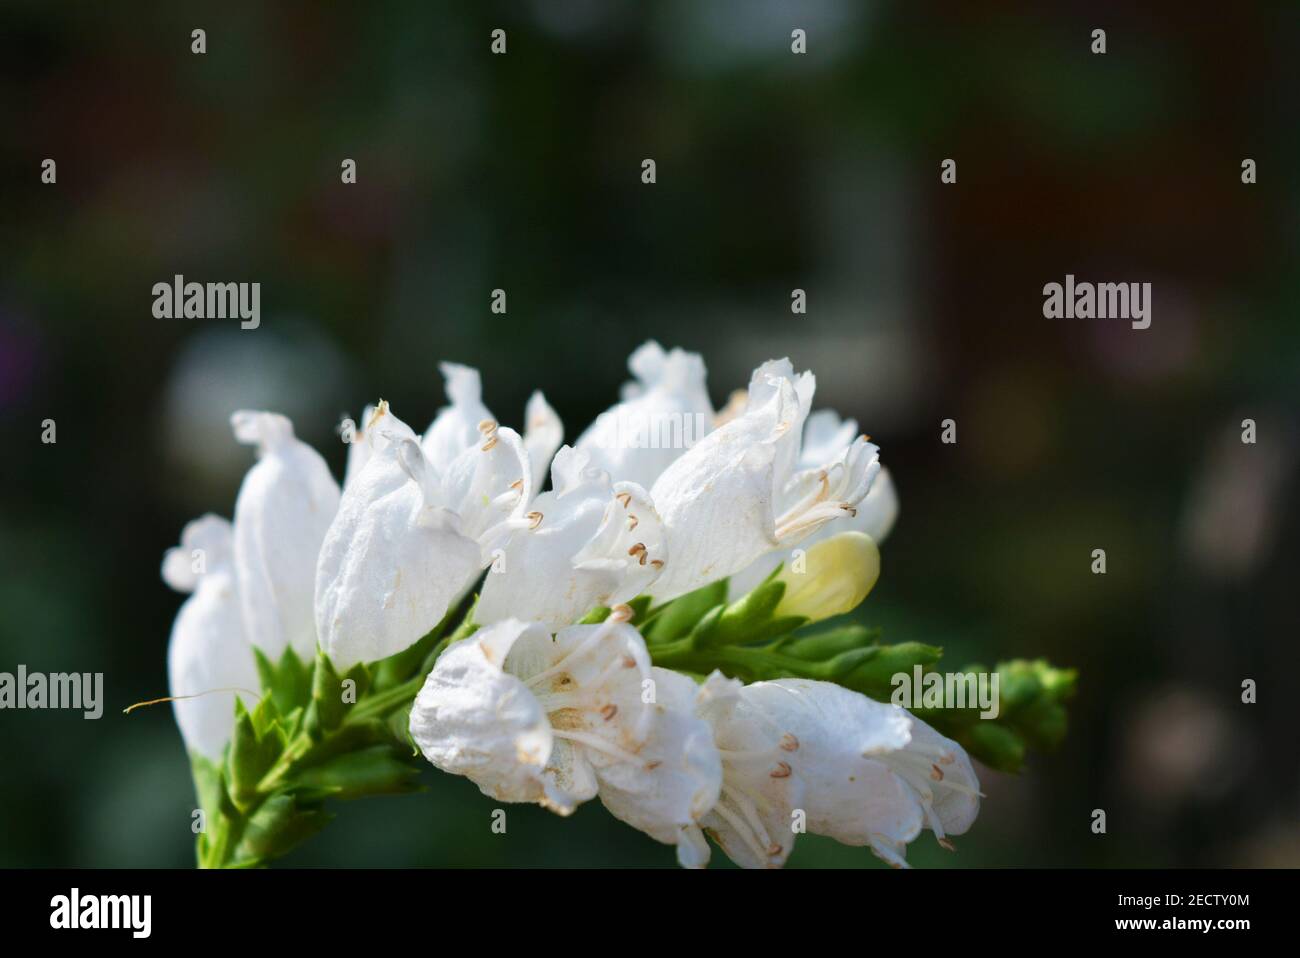 White perennial physostegia flowers in the form of small bells on green leafy background, lionshearts or false dragonheads Stock Photo